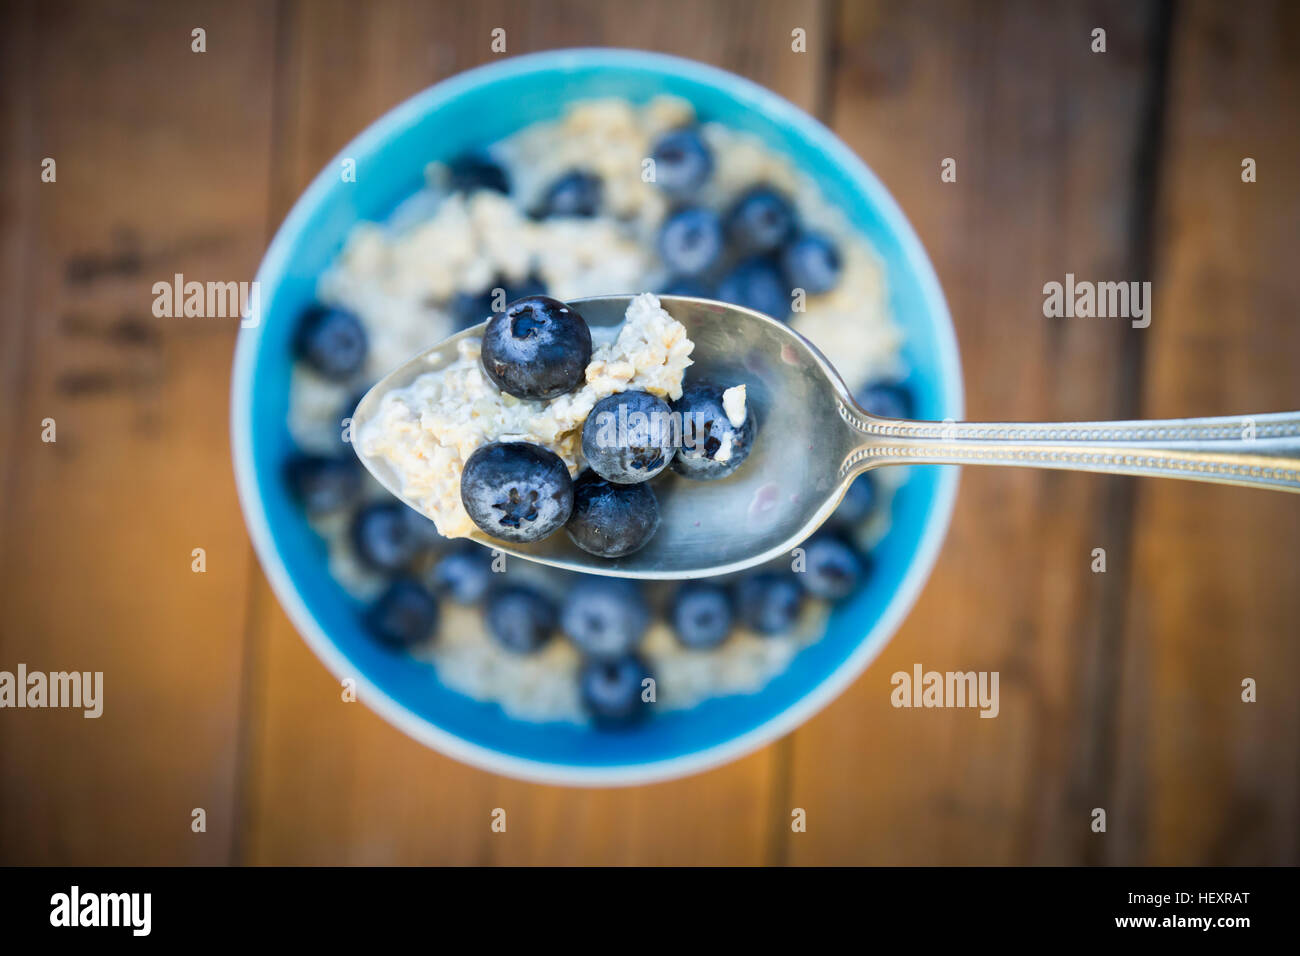 Spoon of overnight oats with blueberries, close-up Stock Photo